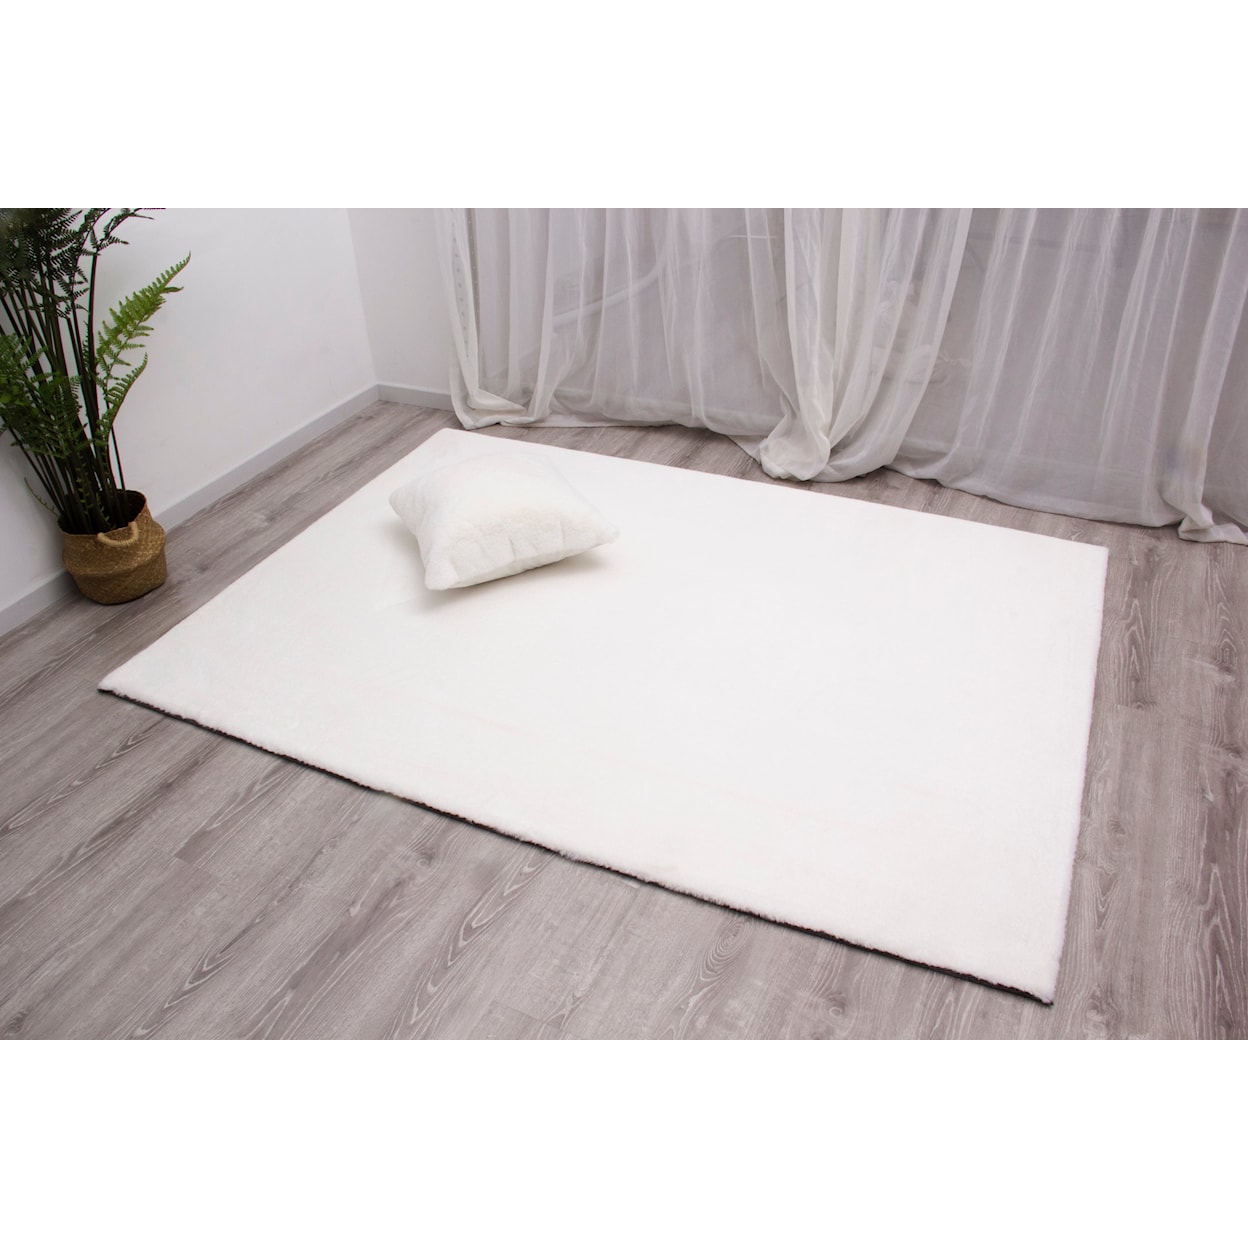 MDA Rugs Rabbit Collection 5 X 7 WHITE 01 FAUX RABBIT FUR RUG |